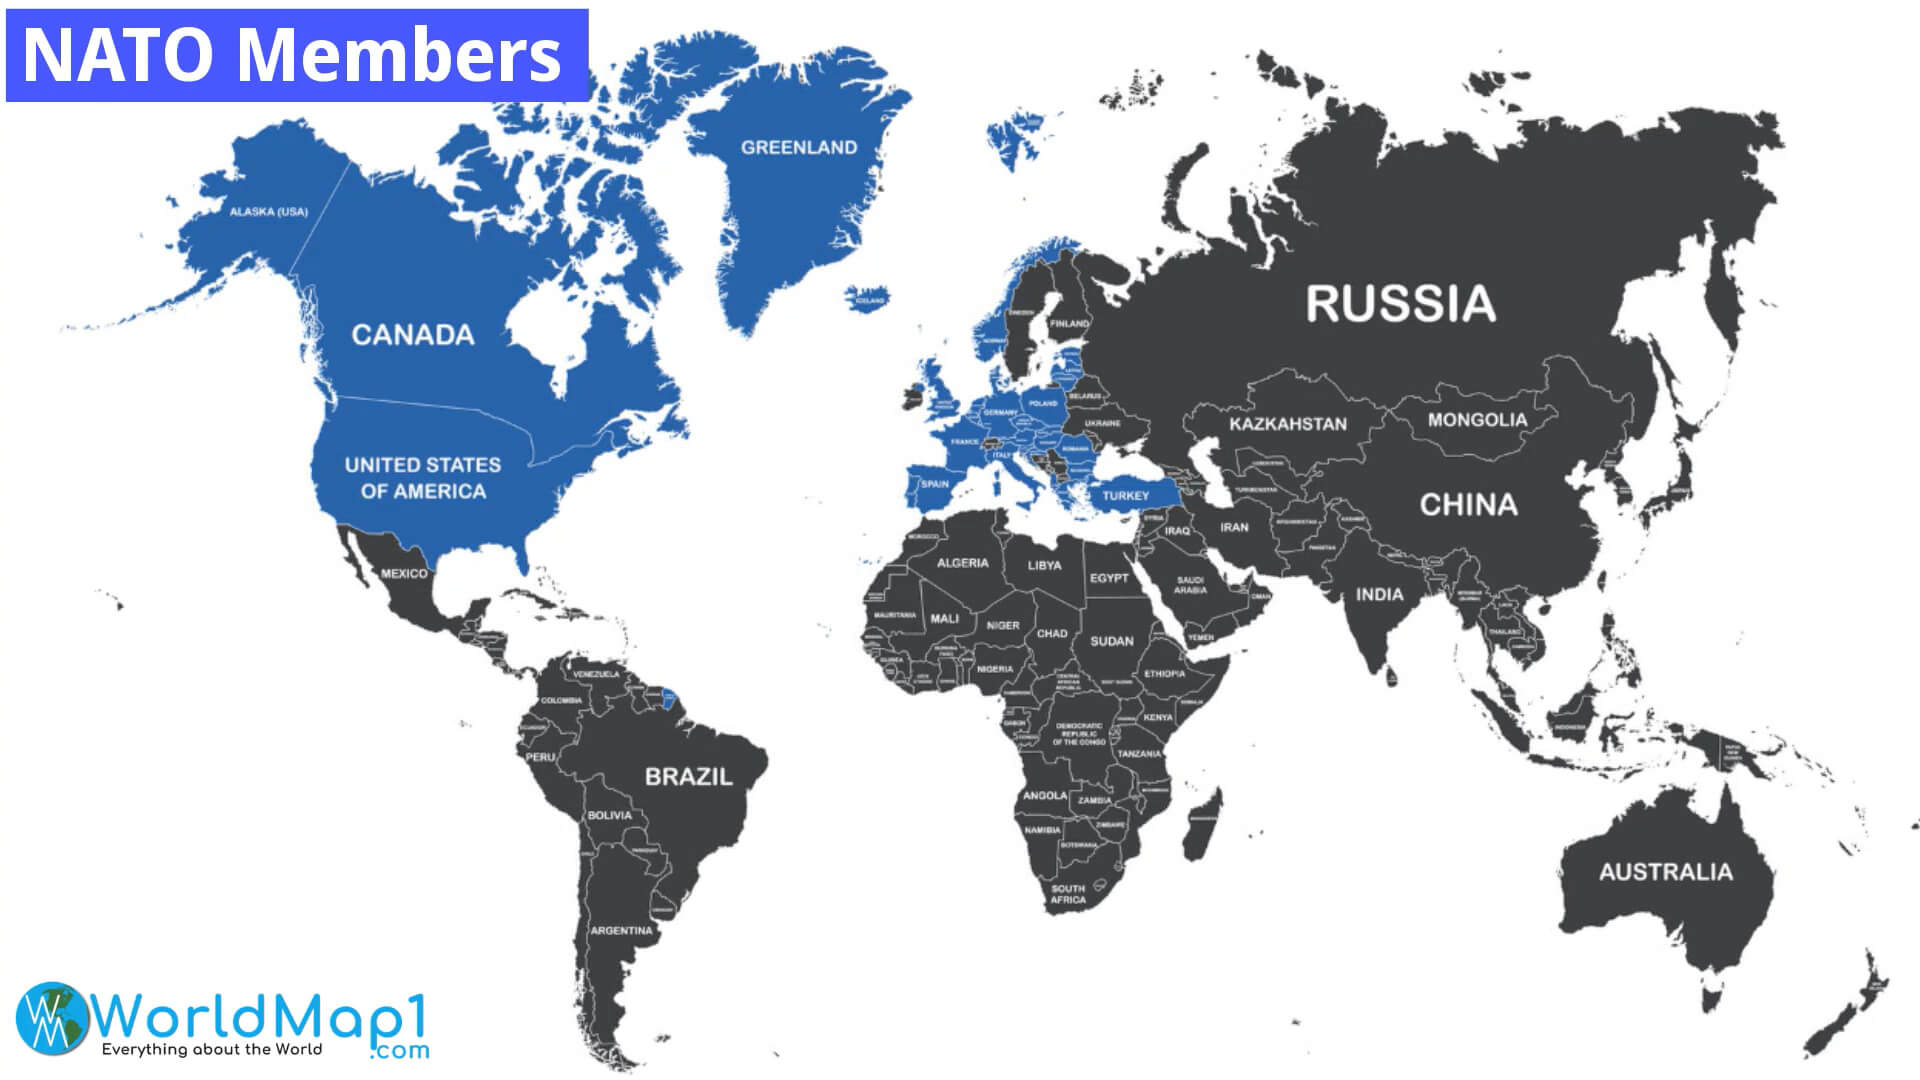 NATO Members with the World Map